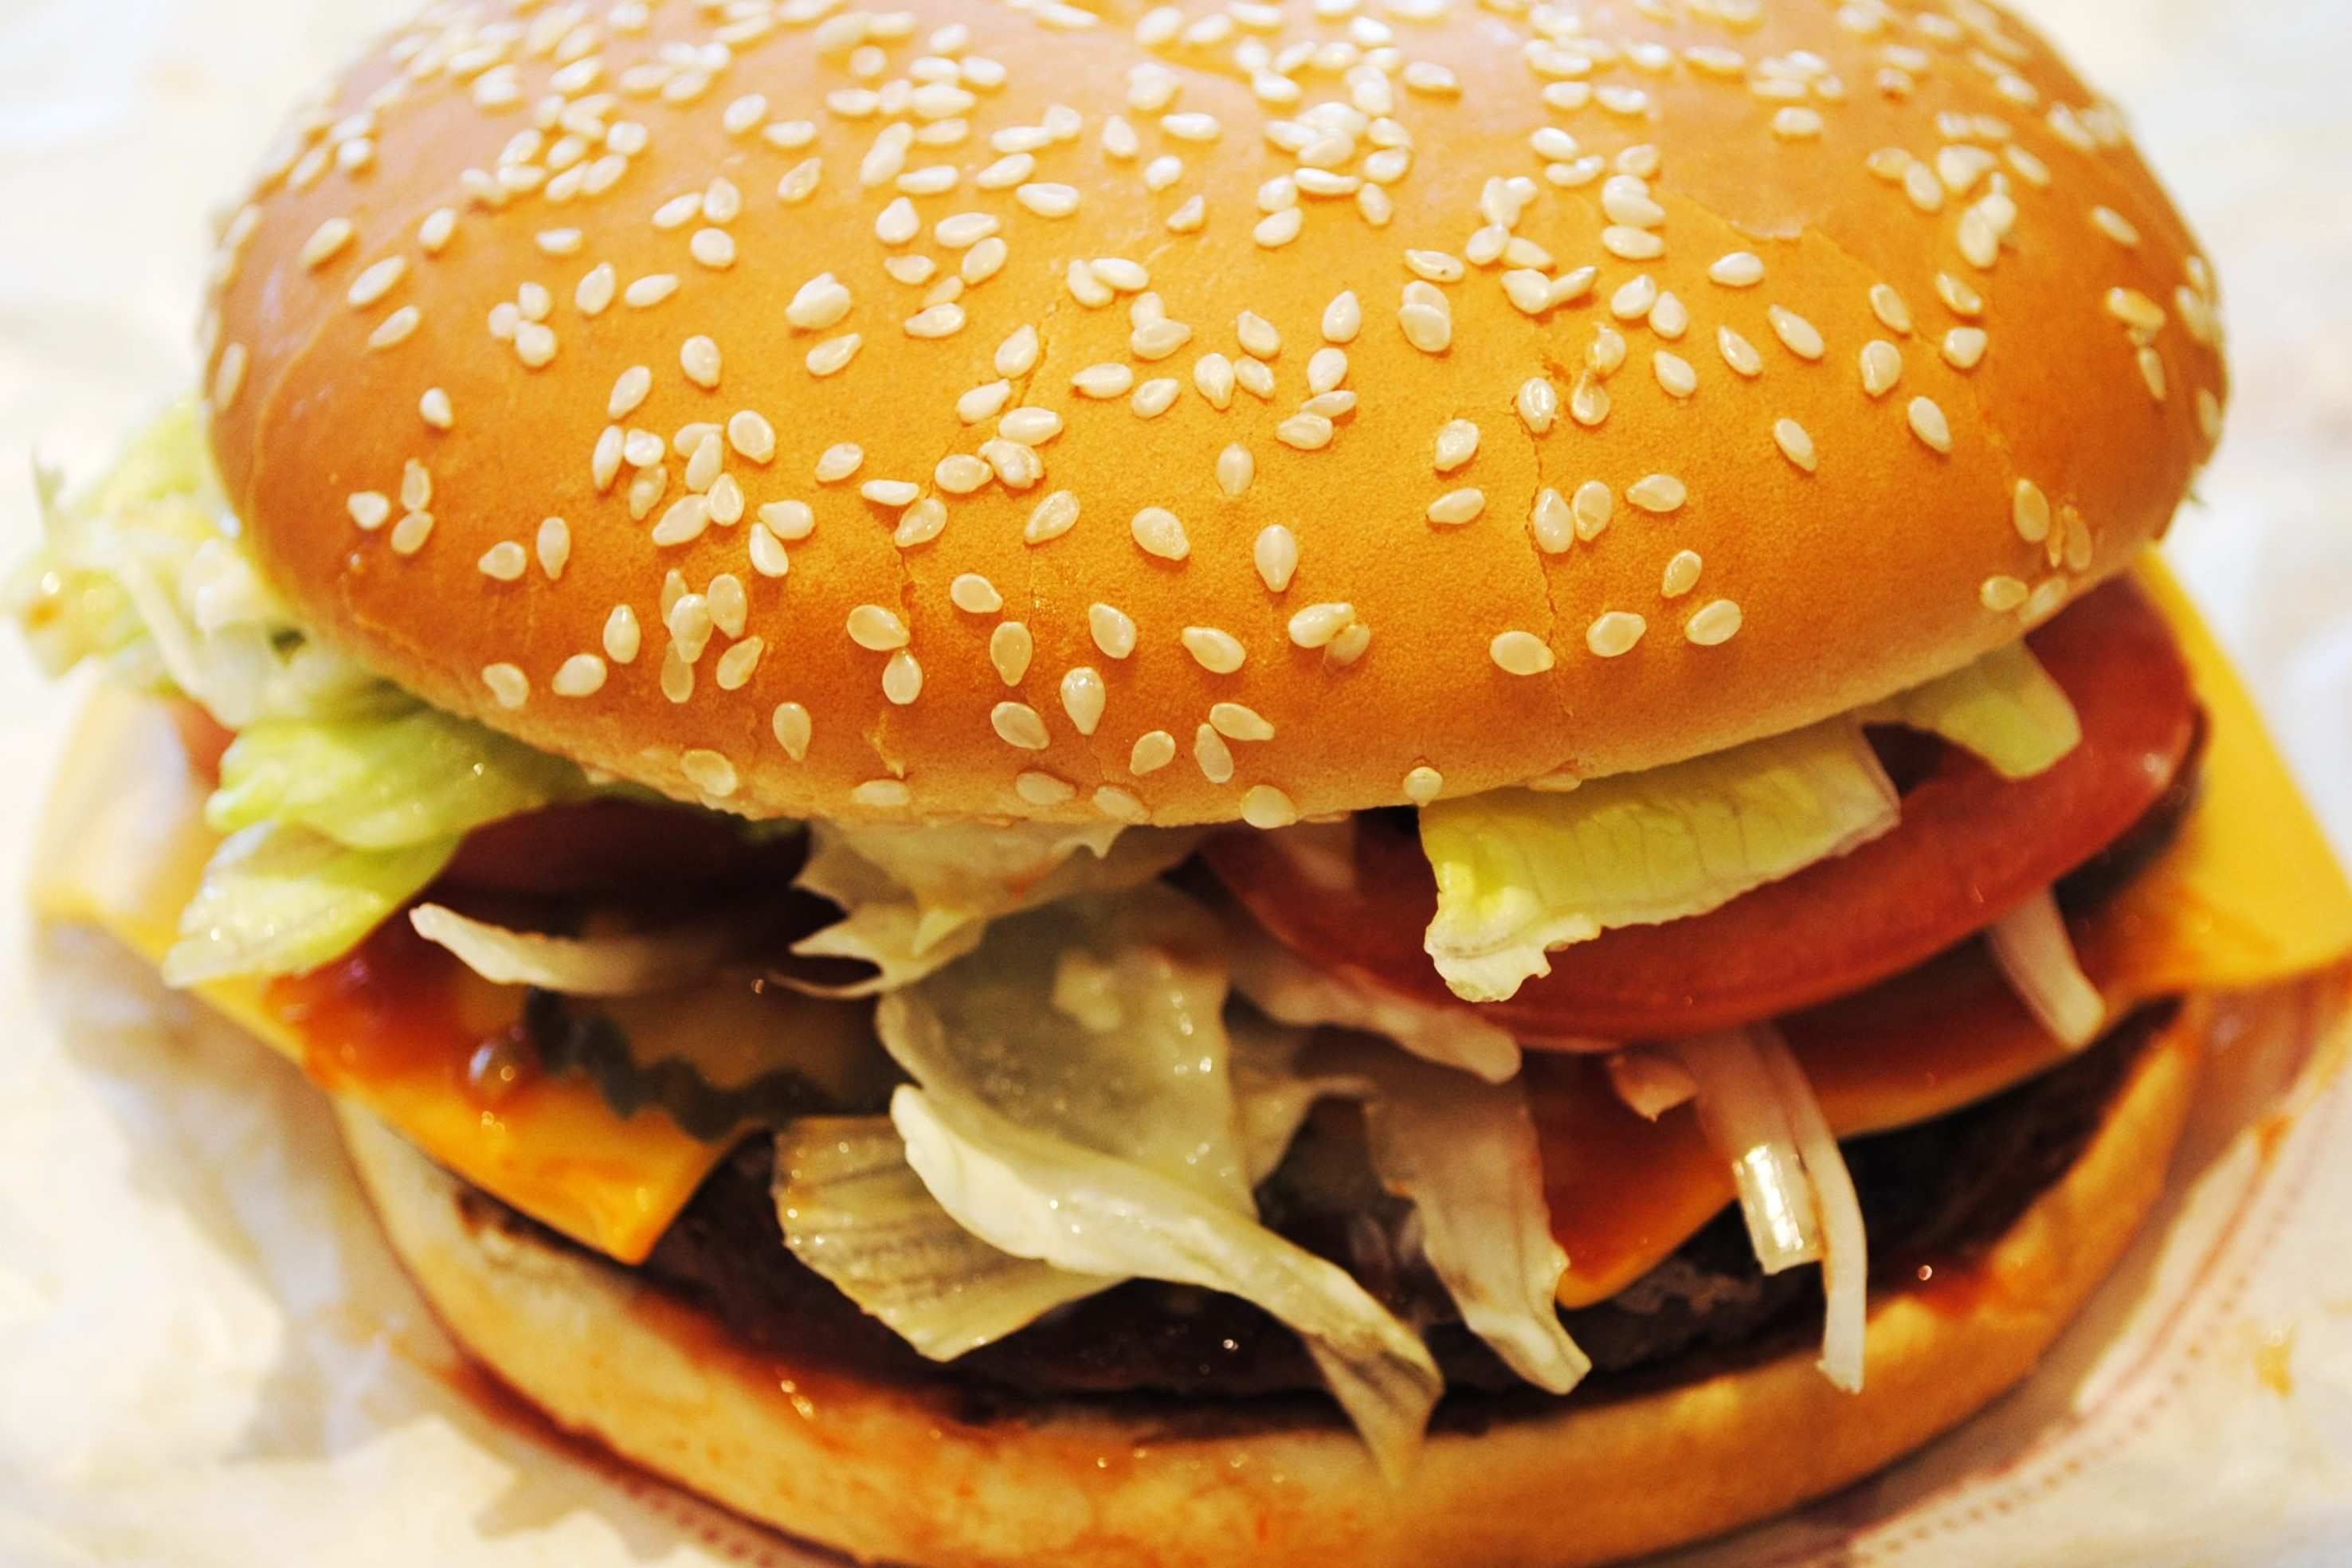 15-whopper-nutritional-facts